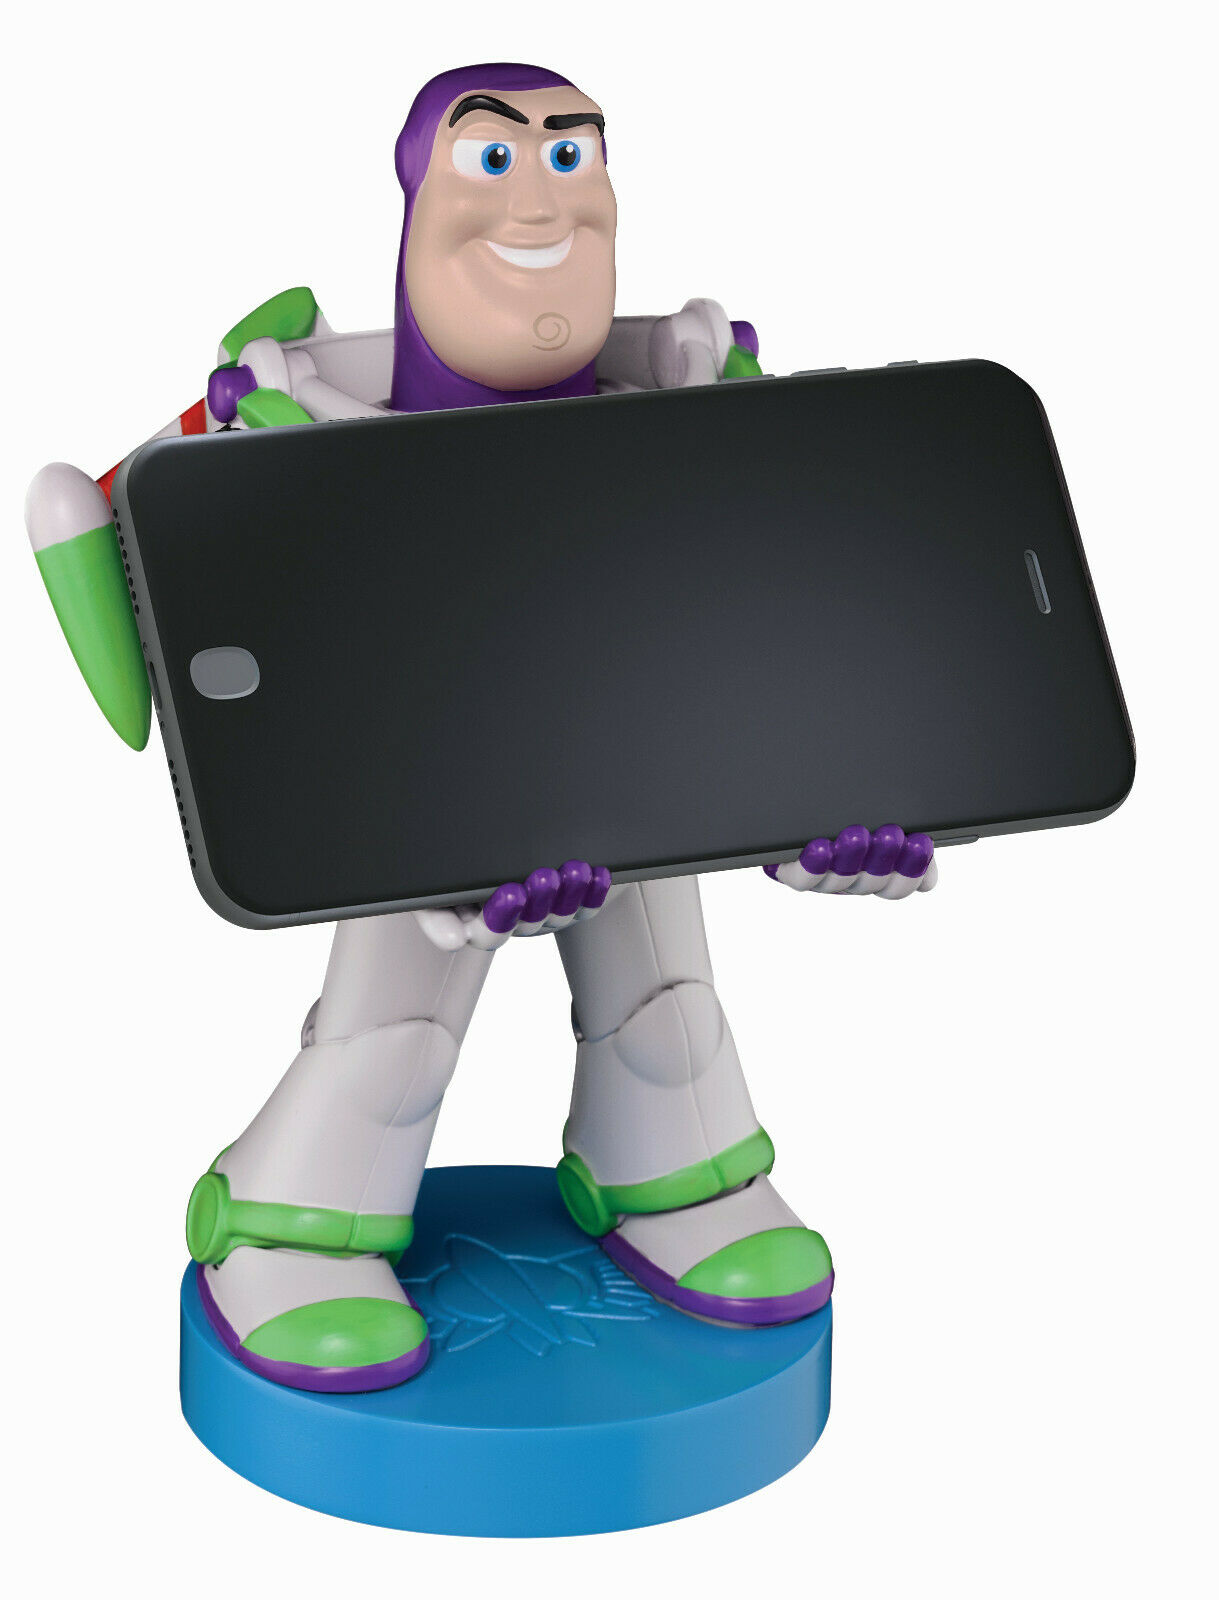 CABLE GUYS Buzz Lightyear